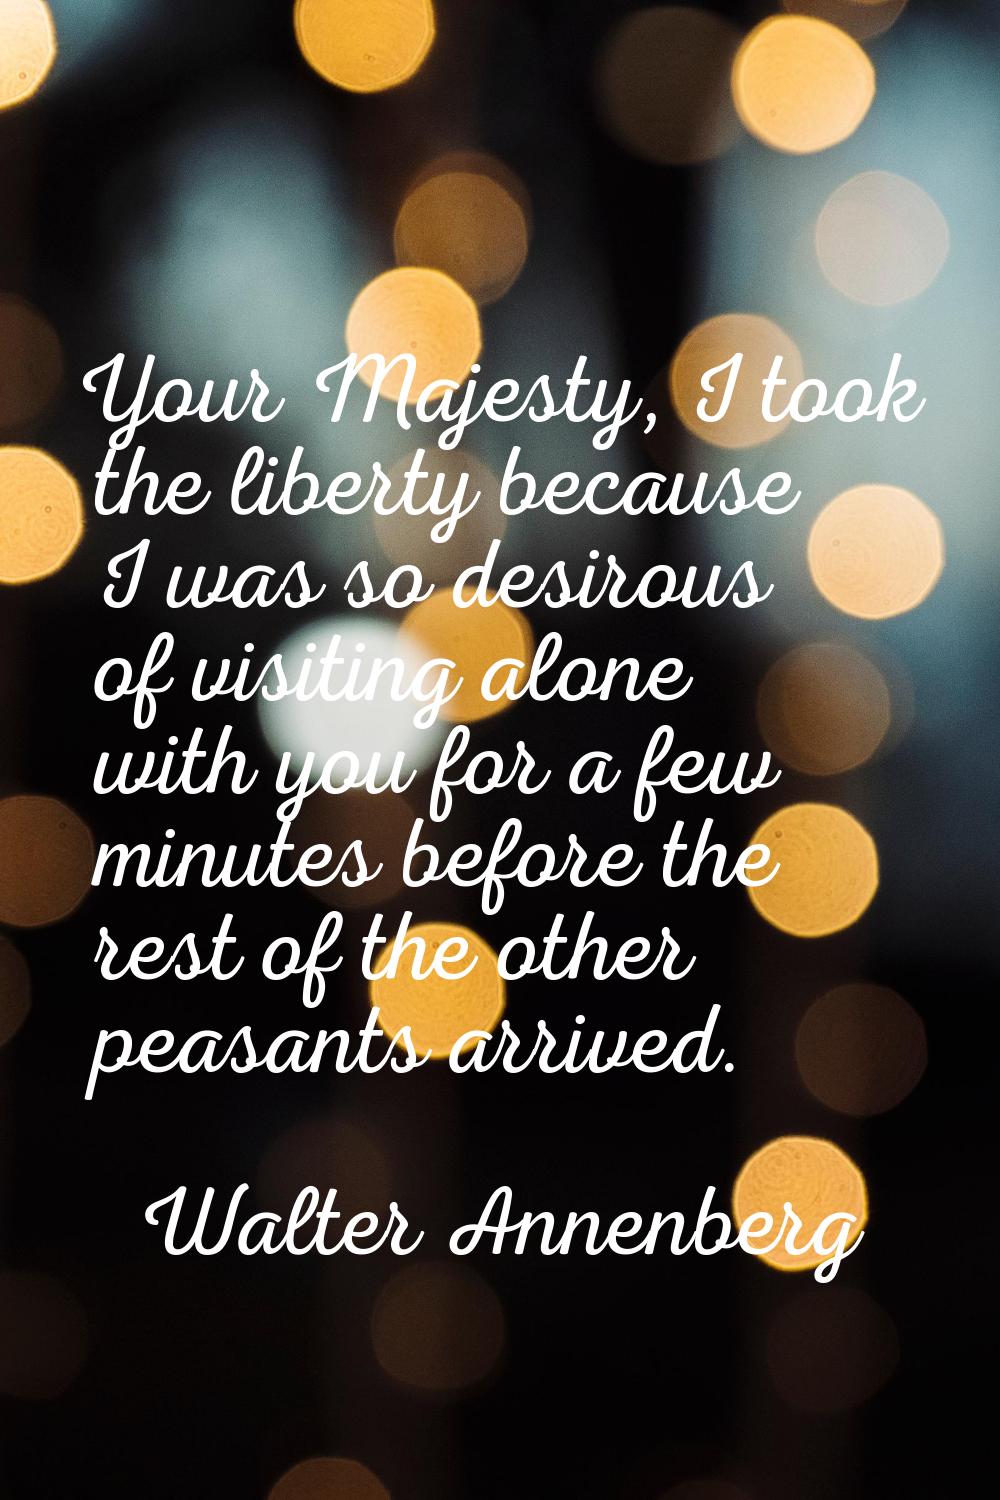 Your Majesty, I took the liberty because I was so desirous of visiting alone with you for a few min